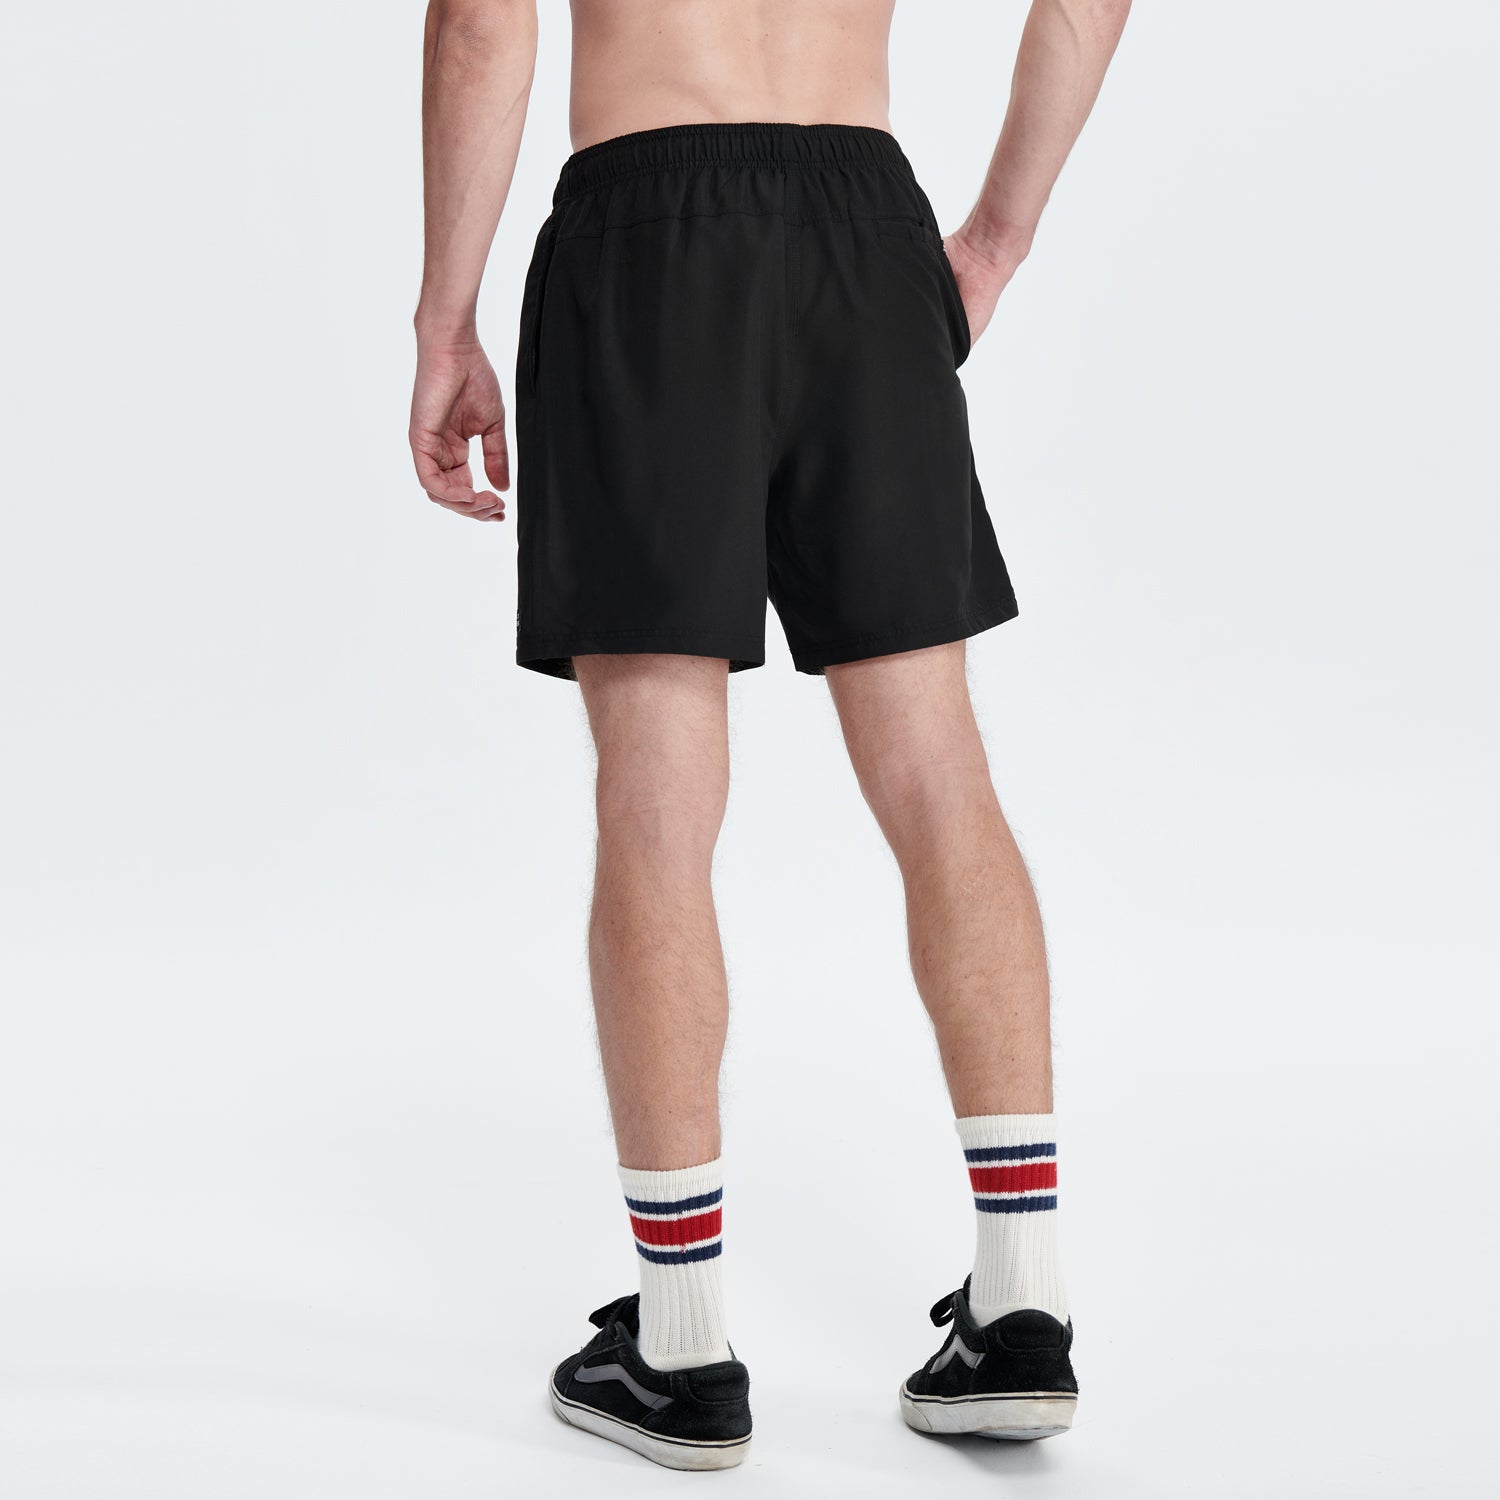 Essential Amph Mountain & Sea Volley Shorts 17" - Black